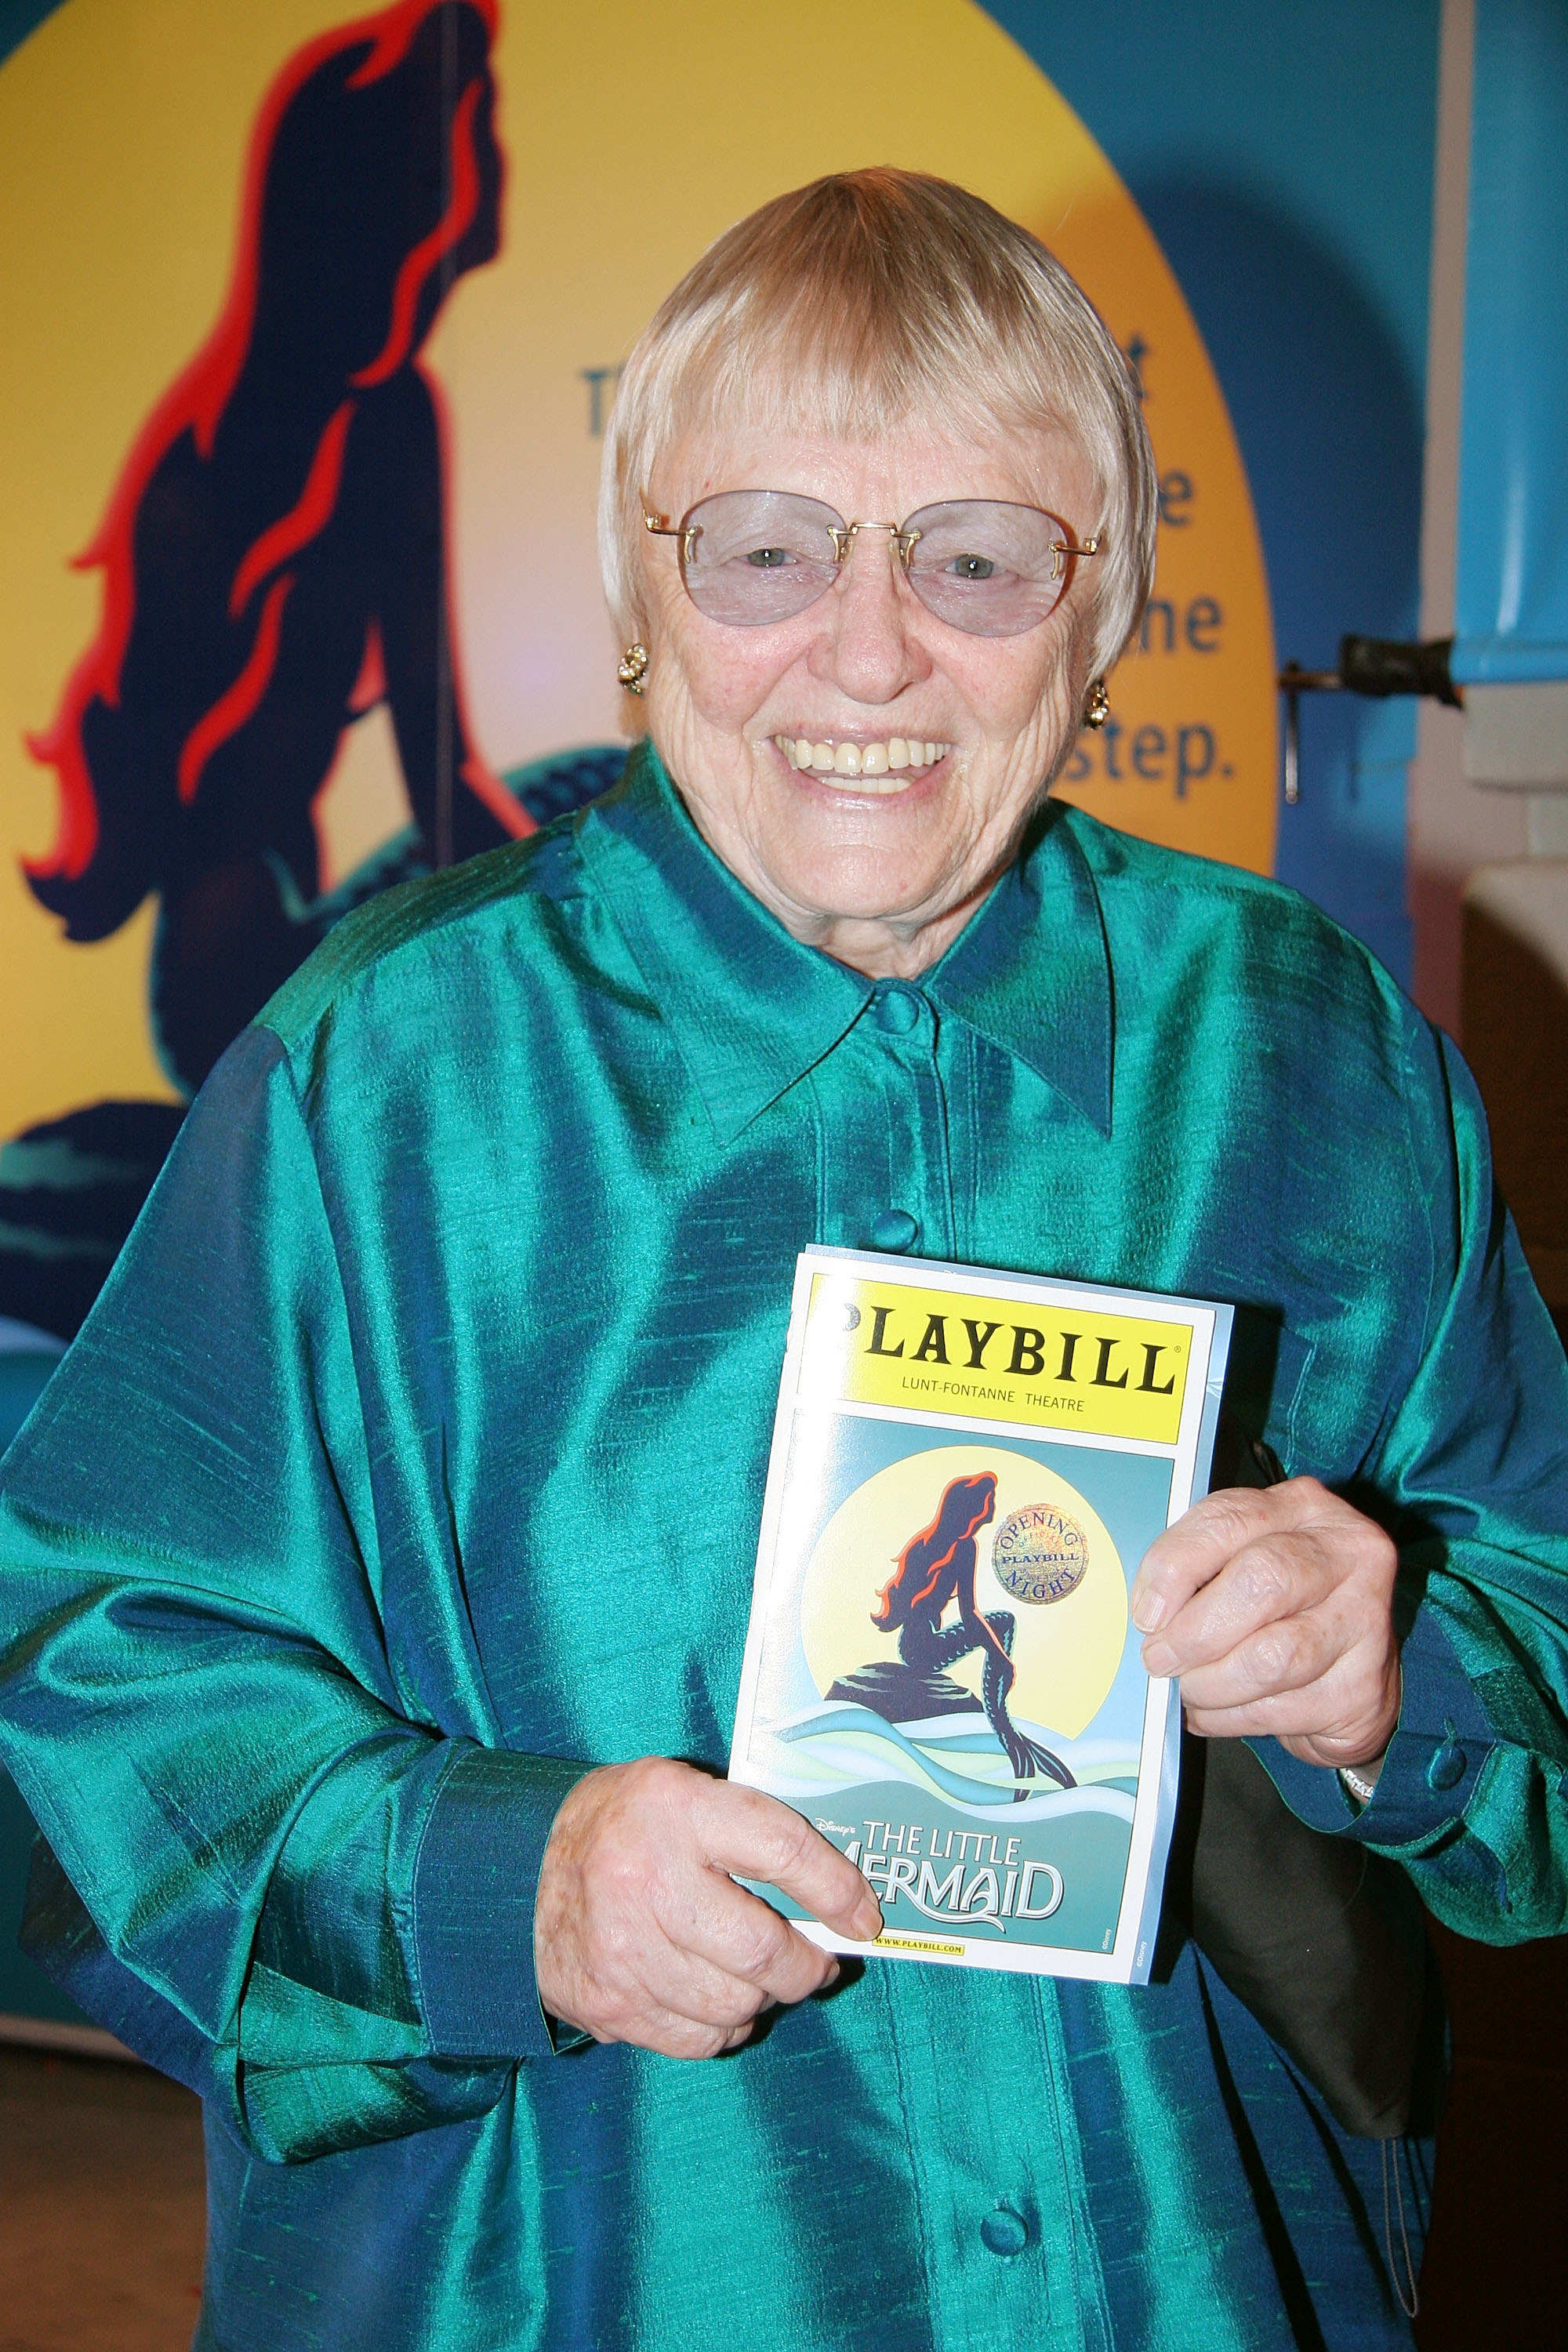 Pat Carroll holding a Playbill for The Little Mermaid theater play